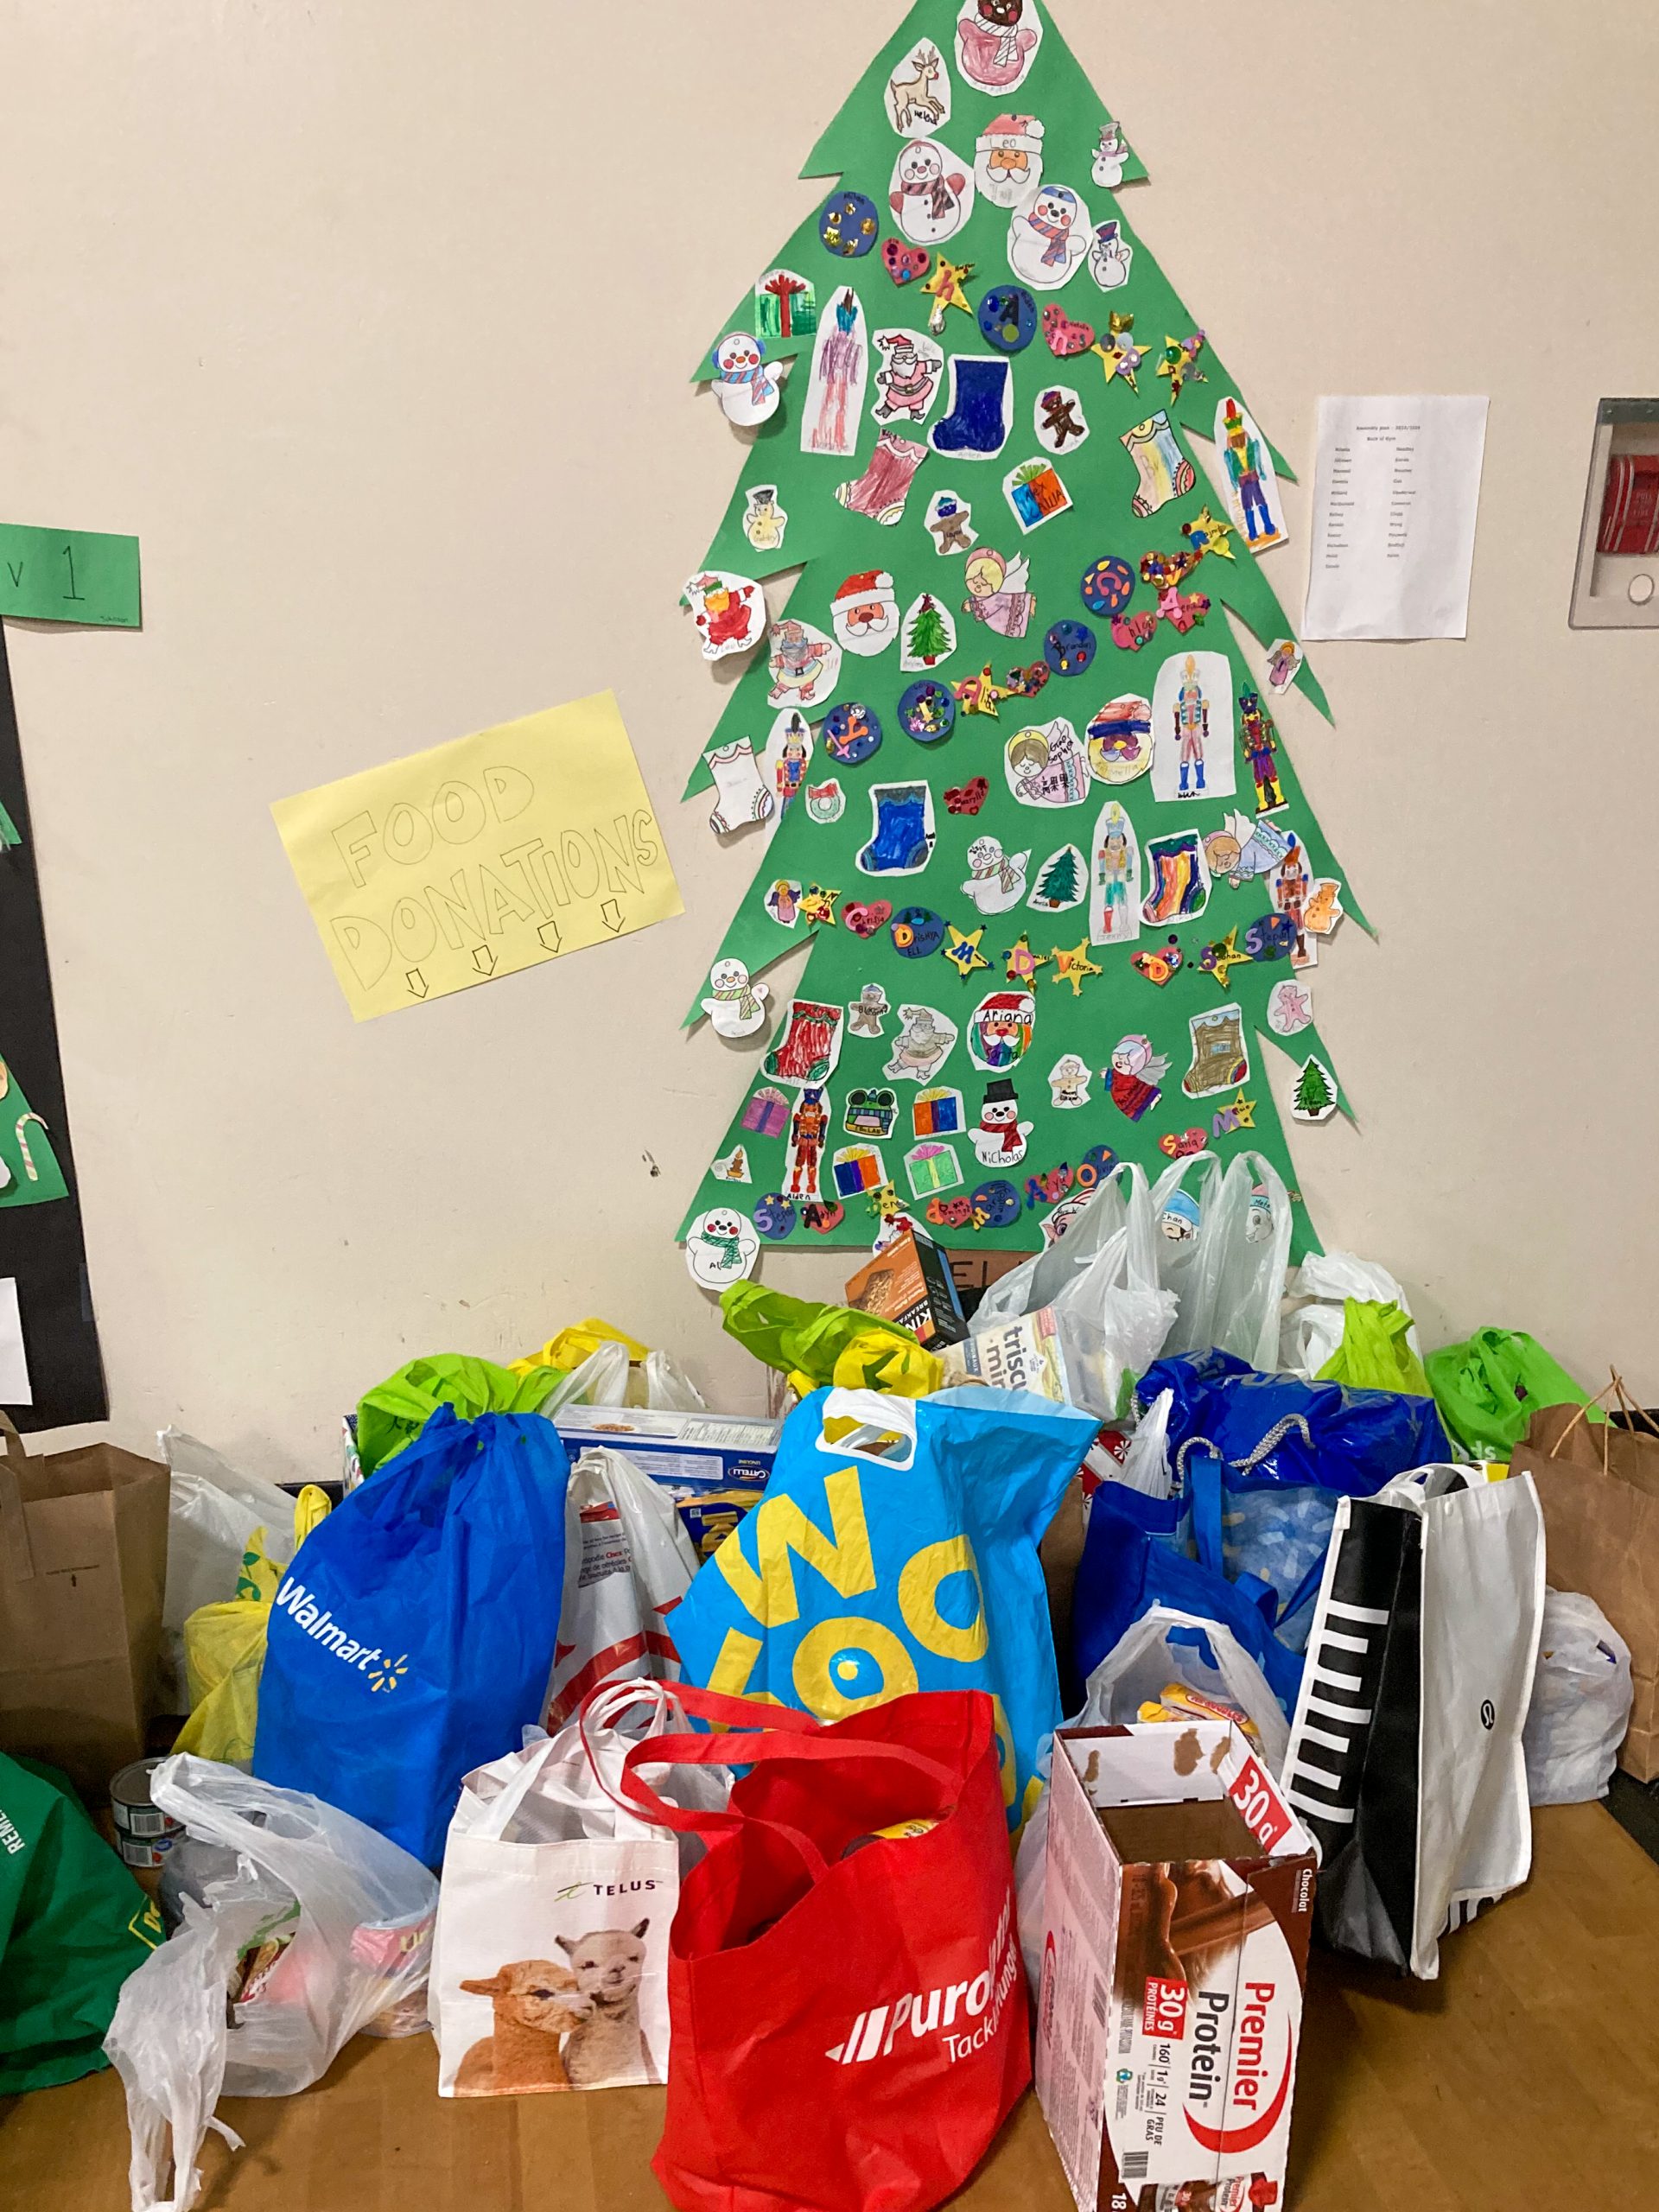 Food drive items in shopping bags underneath a Christmas tree made of poster at Eric Langton Elementary.